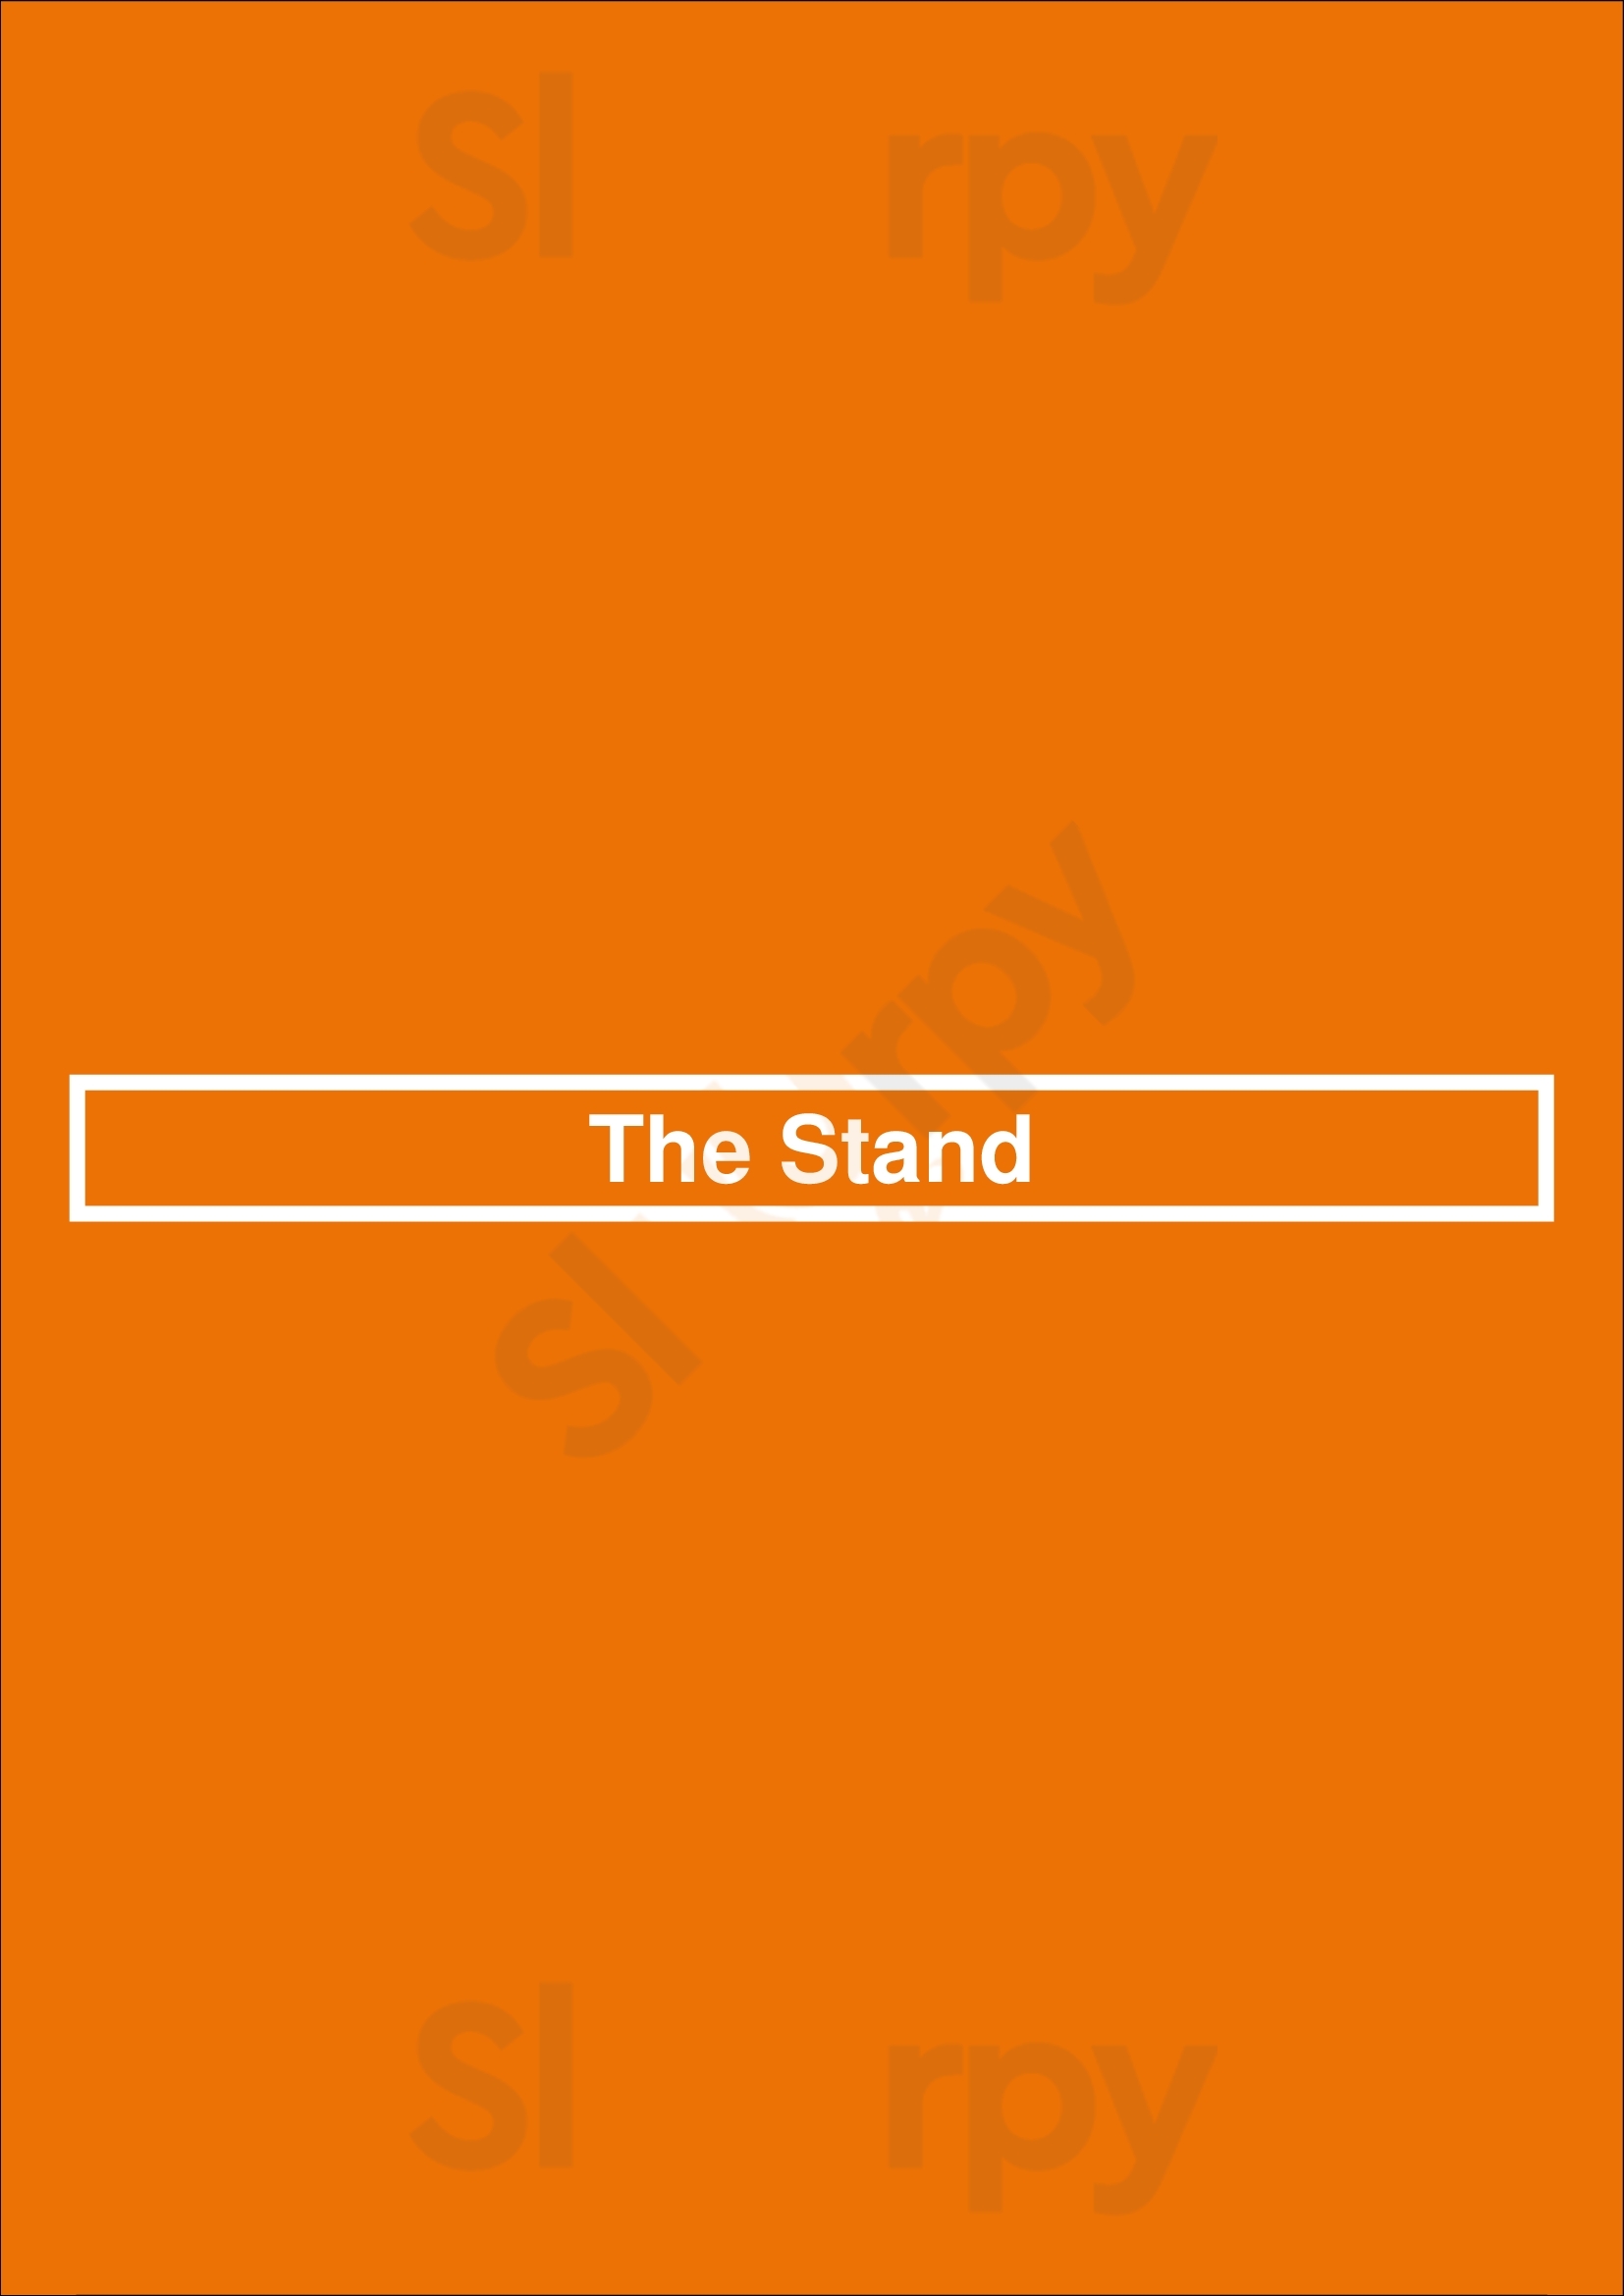 The Stand Los Angeles Menu - 1